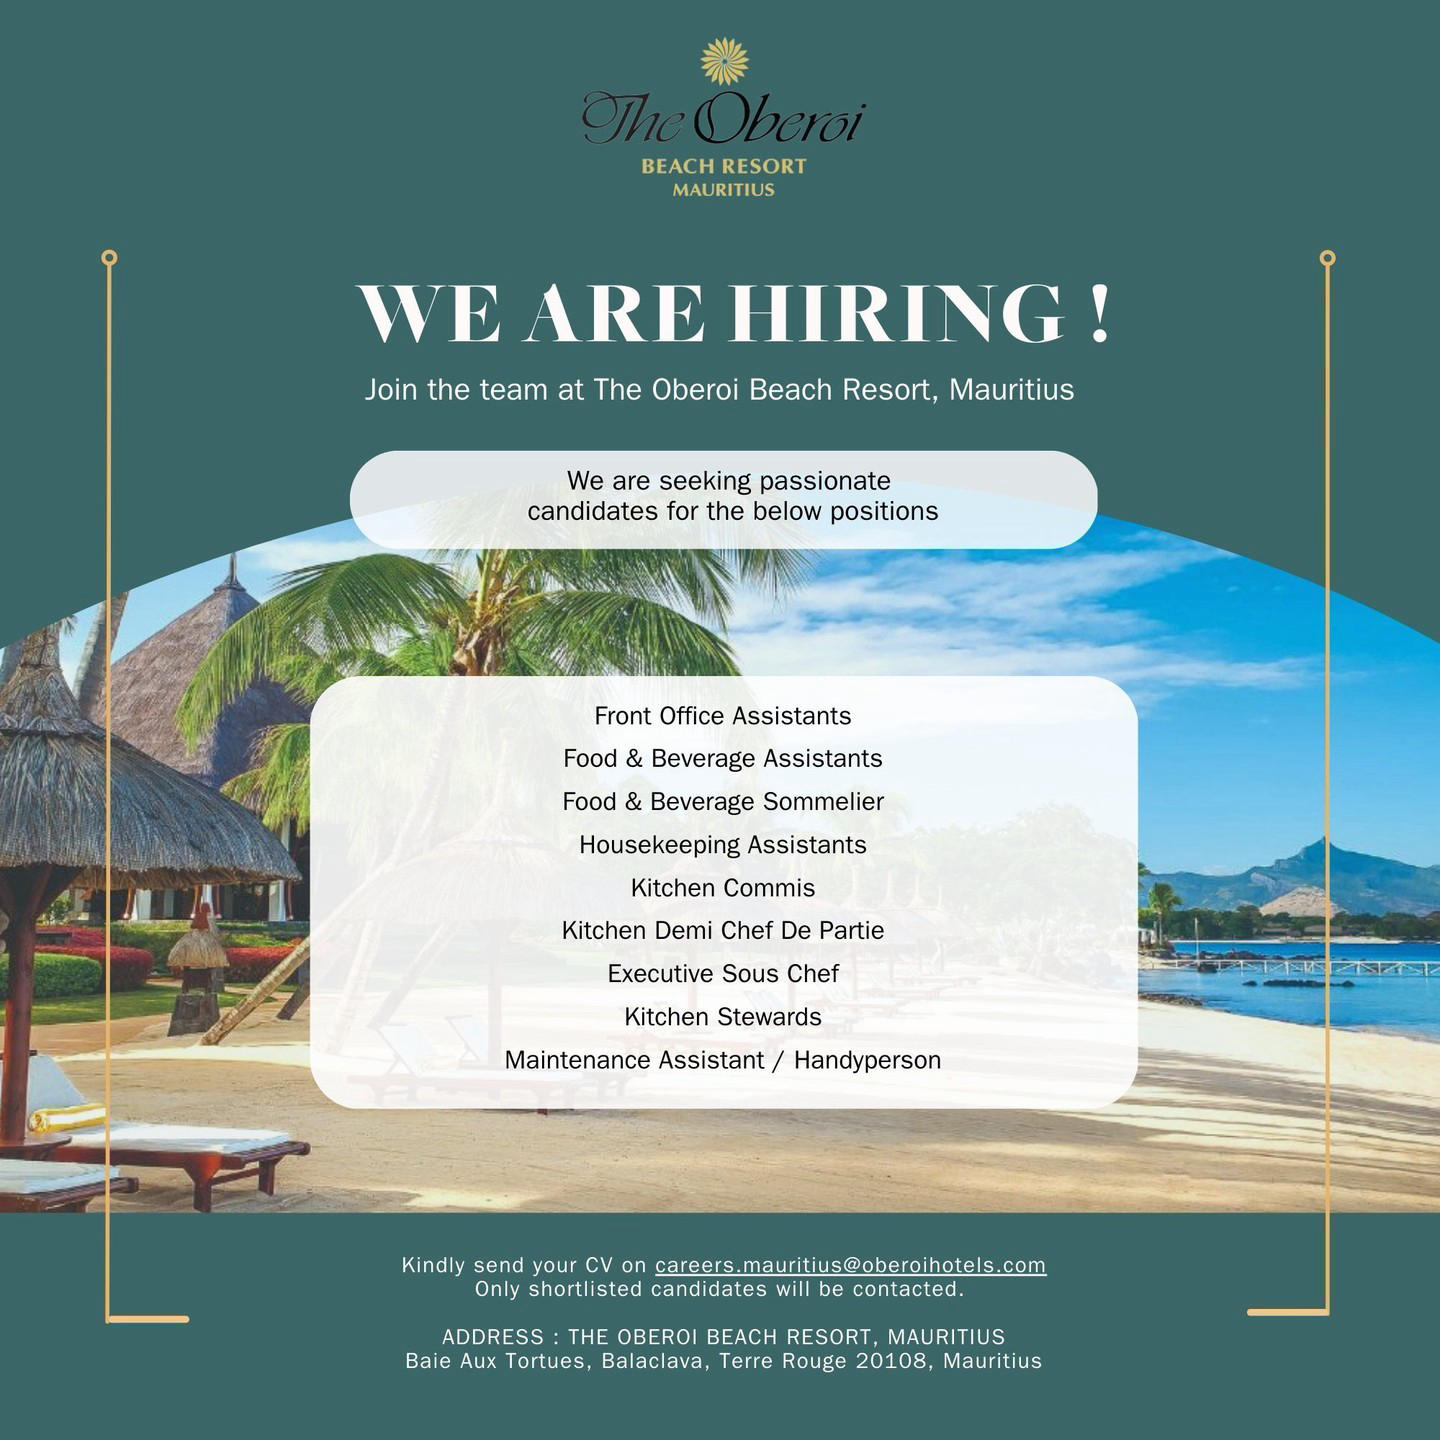 We are looking for passionate talents who want to work at a resort in the middle of paradise